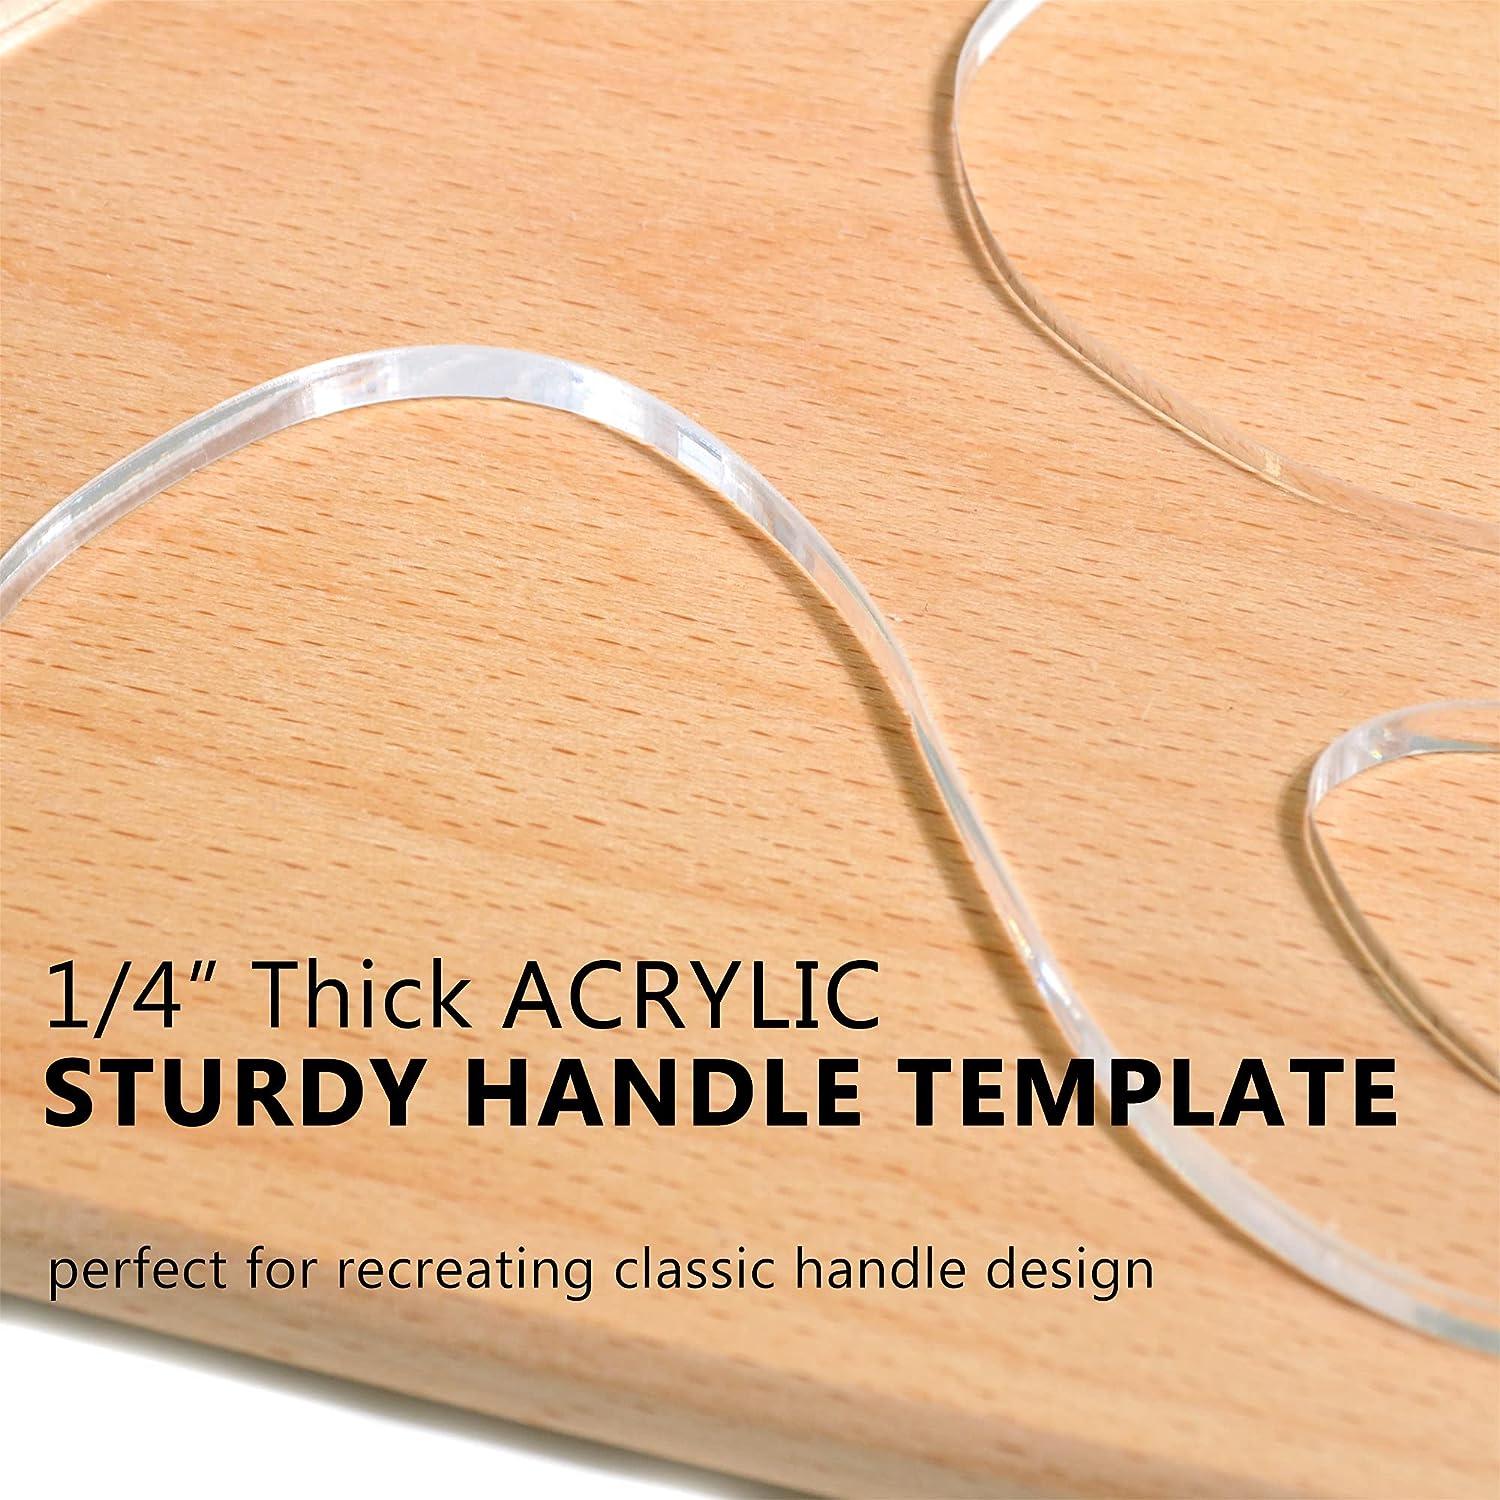 Double Sided Template Tape For Acrylic Router Templates